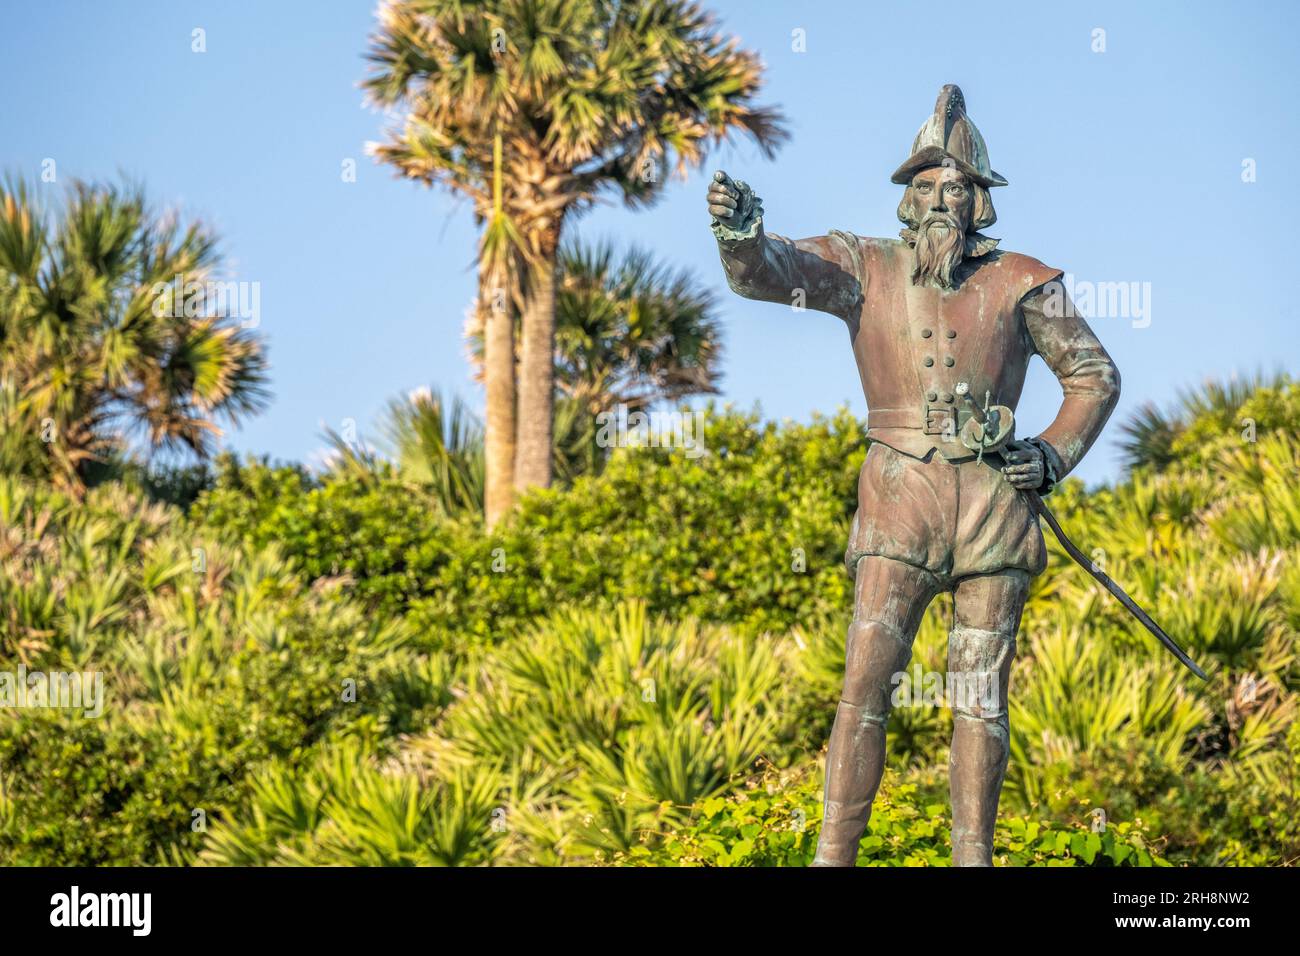 Statue of Juan Ponce de Leon, Spanish explorer who led the first known European expedition to Florida, at Guana River Preserve, Ponte Vedra Beach, FL. Stock Photo